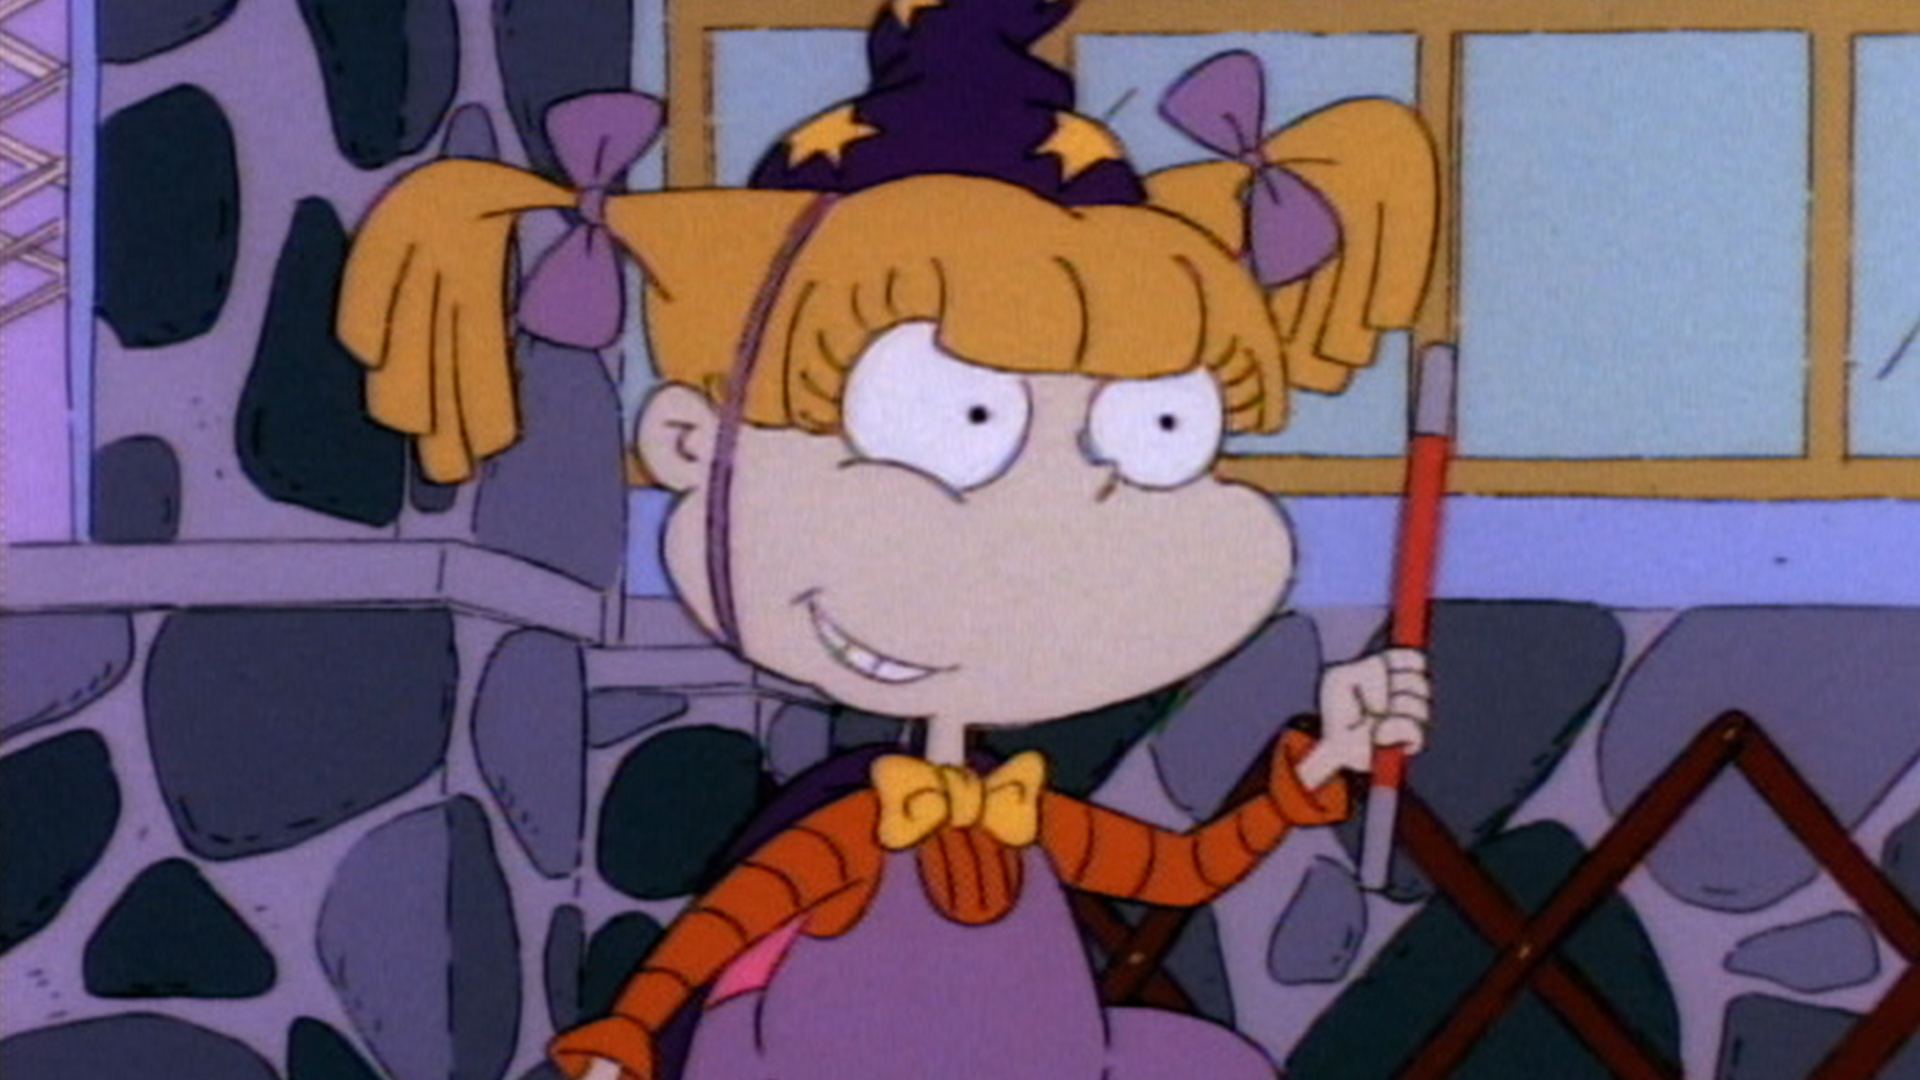 Watch Rugrats Season 2 Episode 17 Rebel Without A Teddy Bearangelica The Magnificent Full